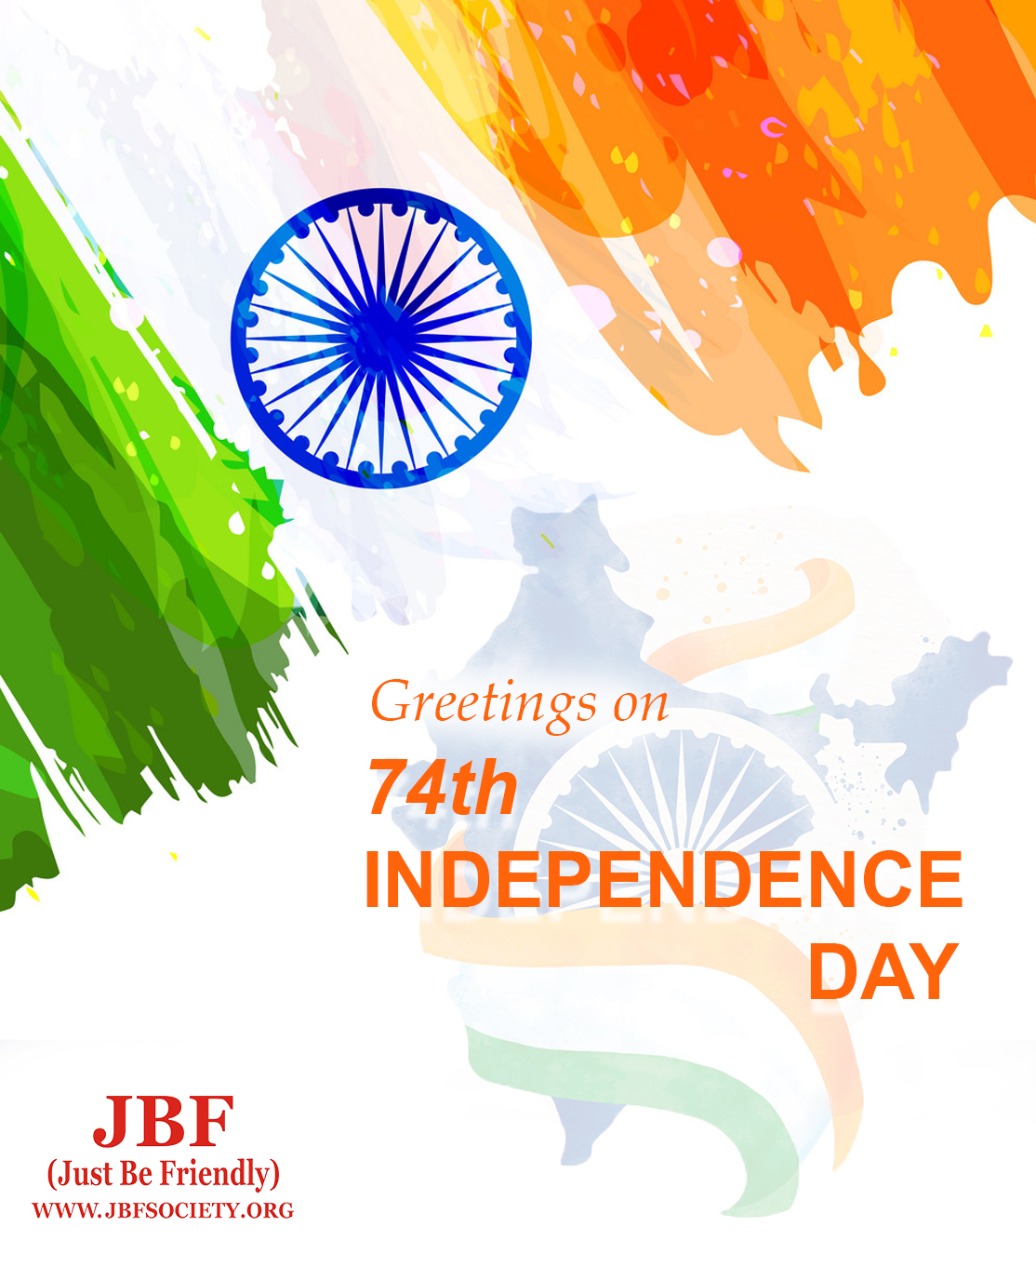 Independence Day wishes – JBF